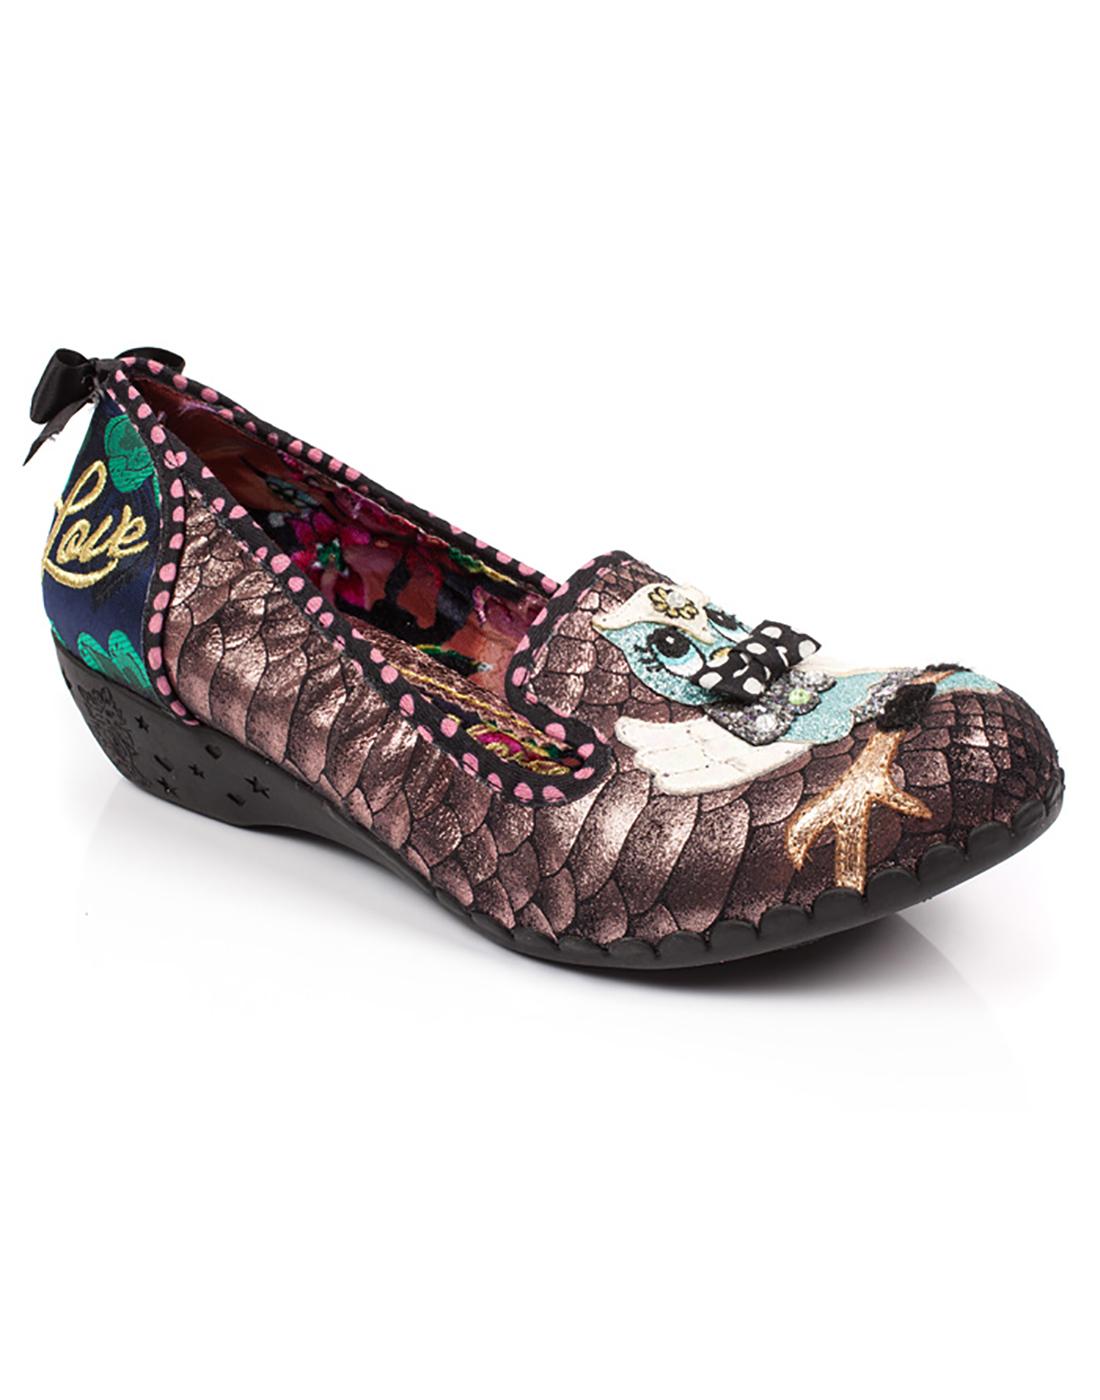 Hooting About IRREGULAR CHOICE Retro Owl Shoes